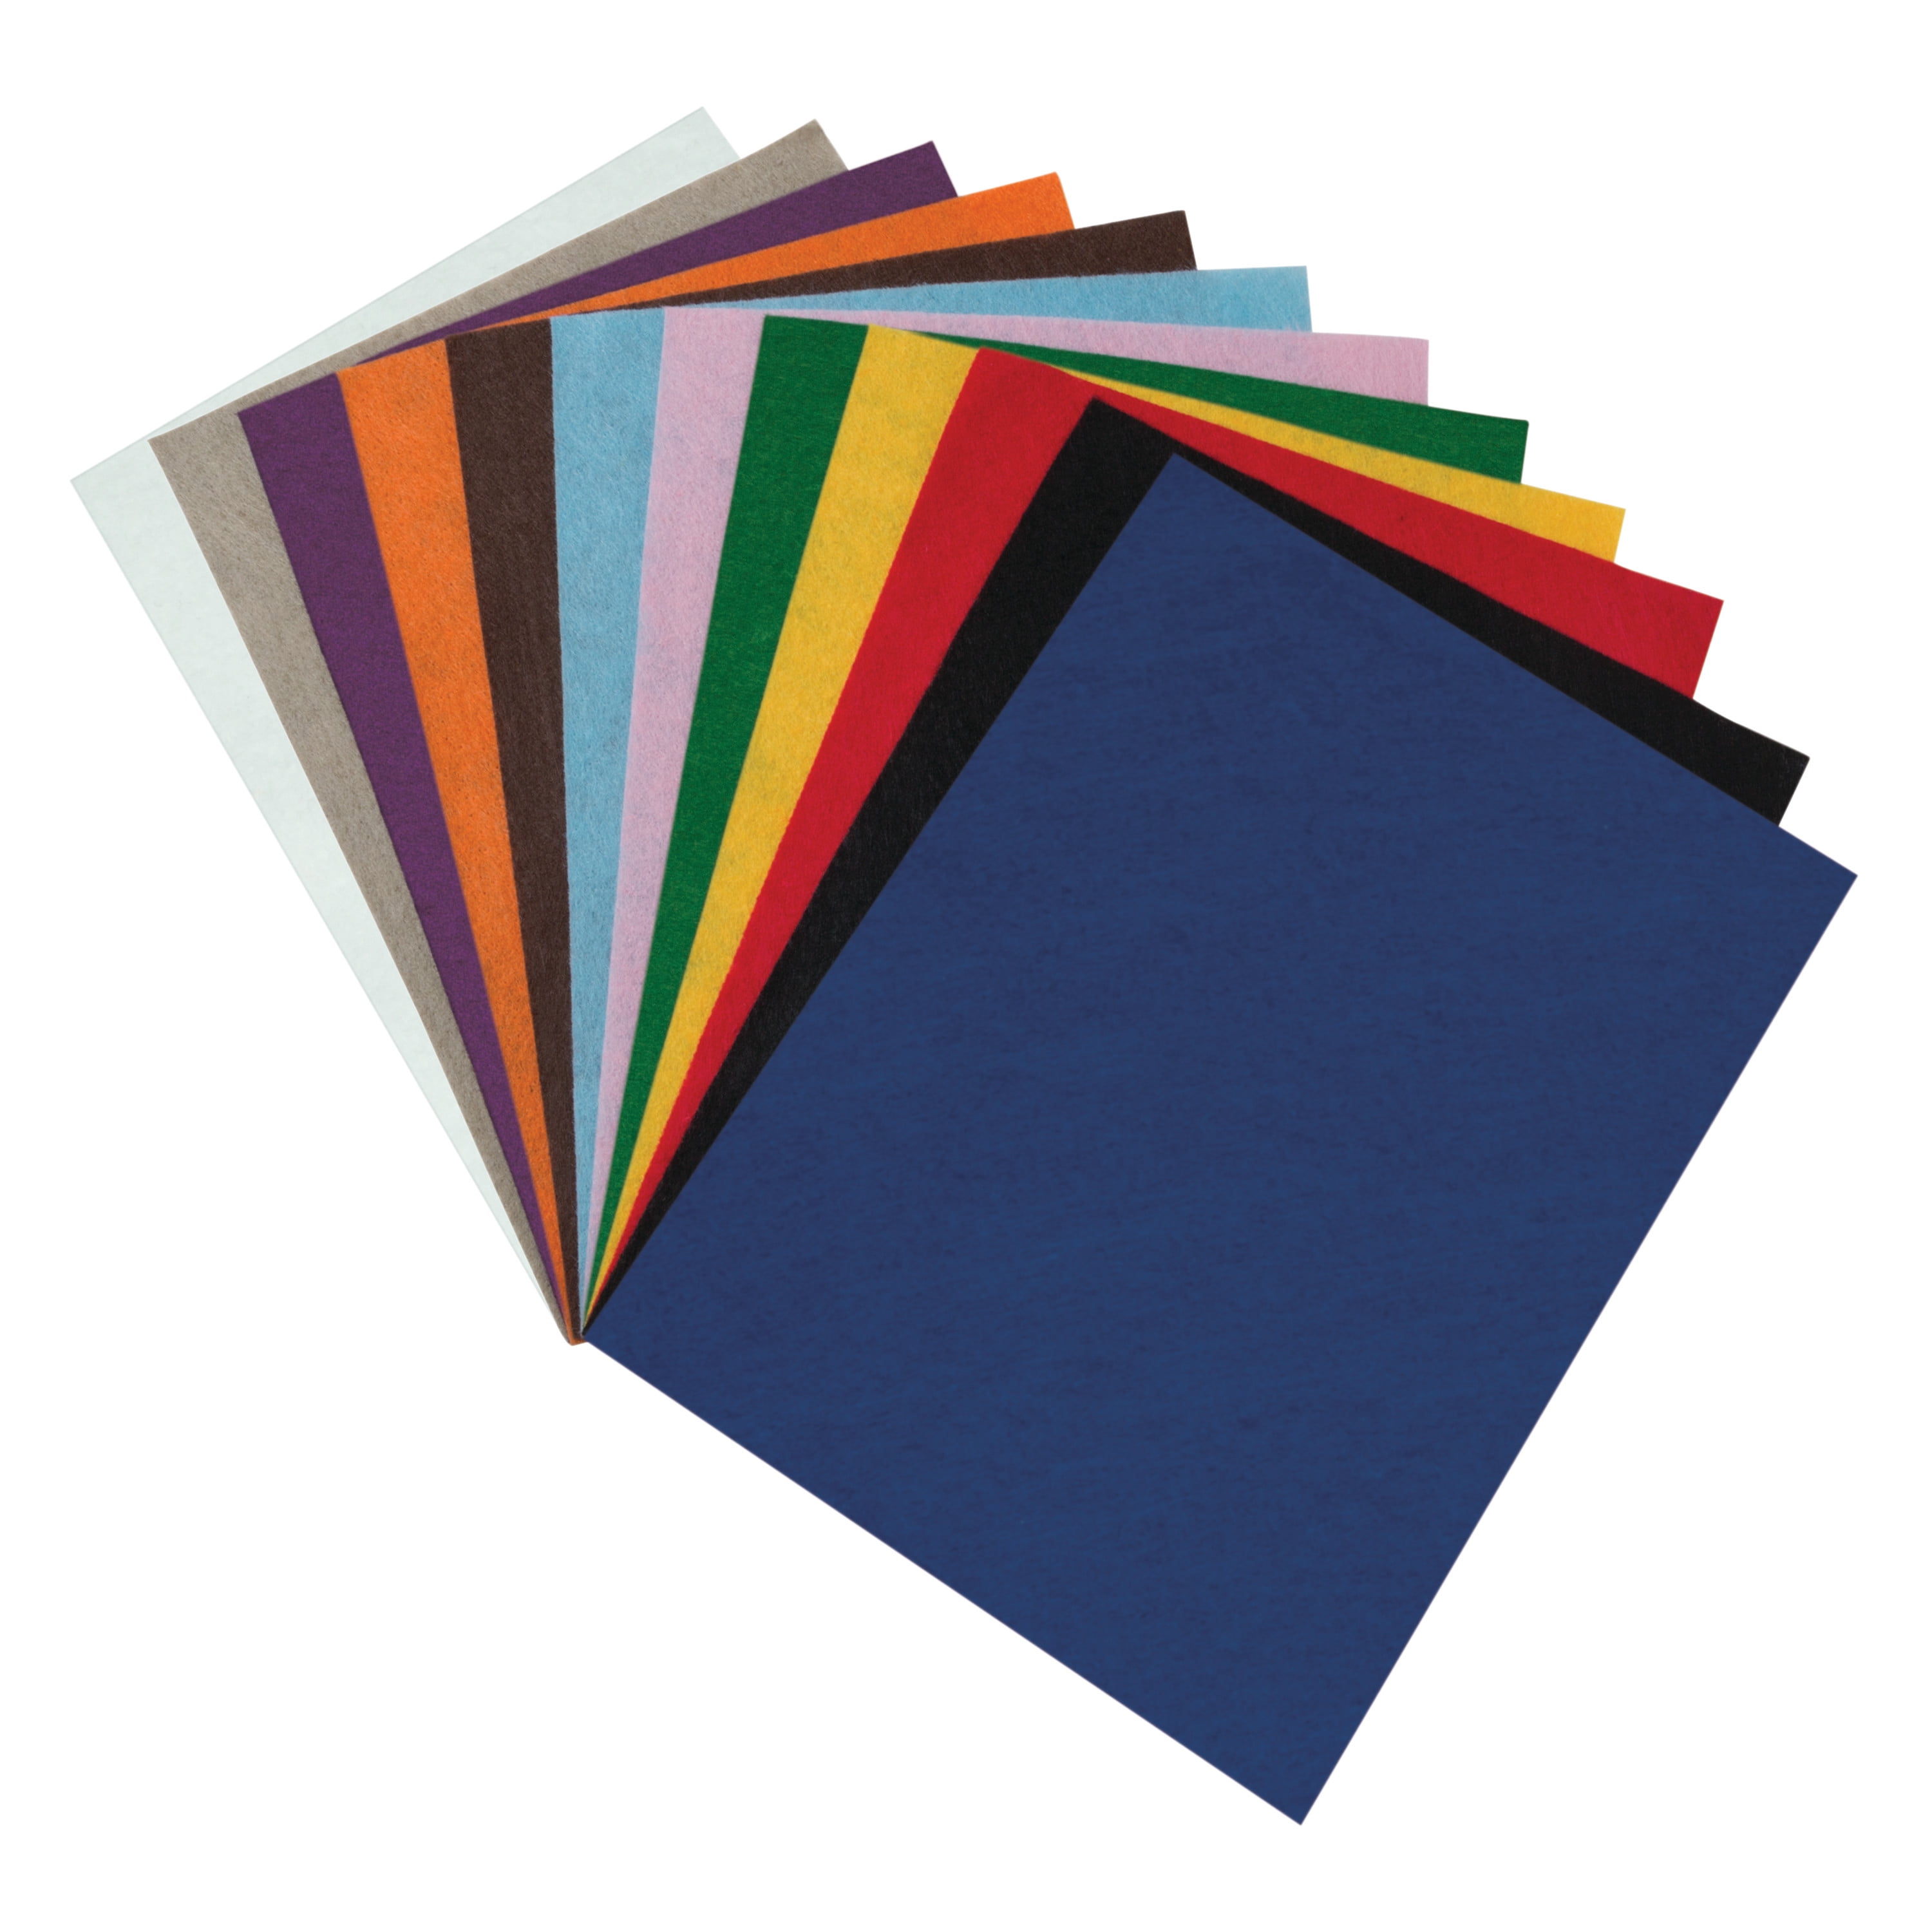 24 Packs: 18 ct. (432 total) 9 x 12 White Felt Sheets by Creatology™ 